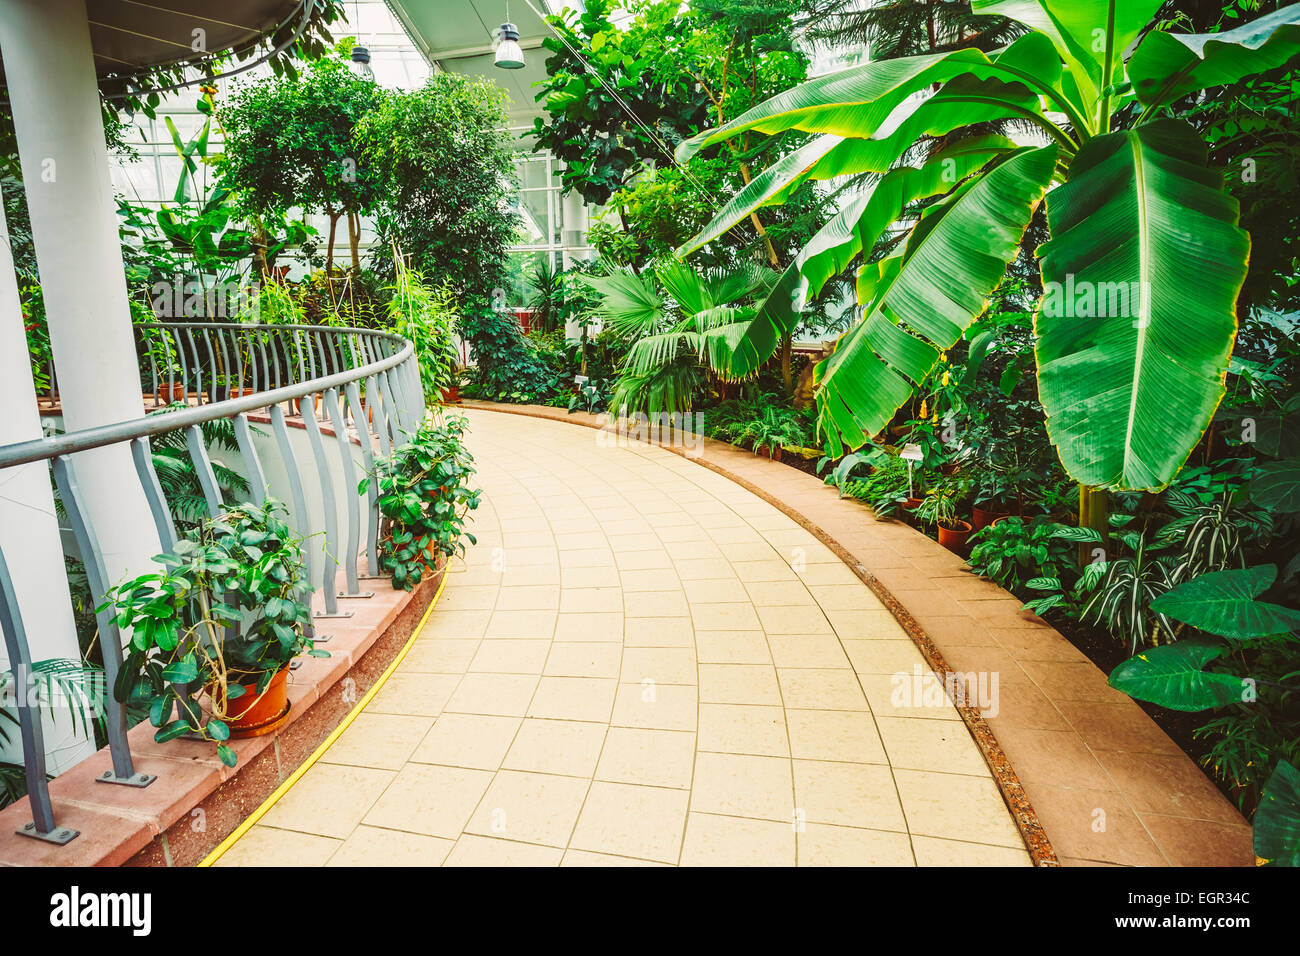 Greenhouse With Flowers And Plants. Temperate House Conservatory, Botanical Gardens. Stock Photo